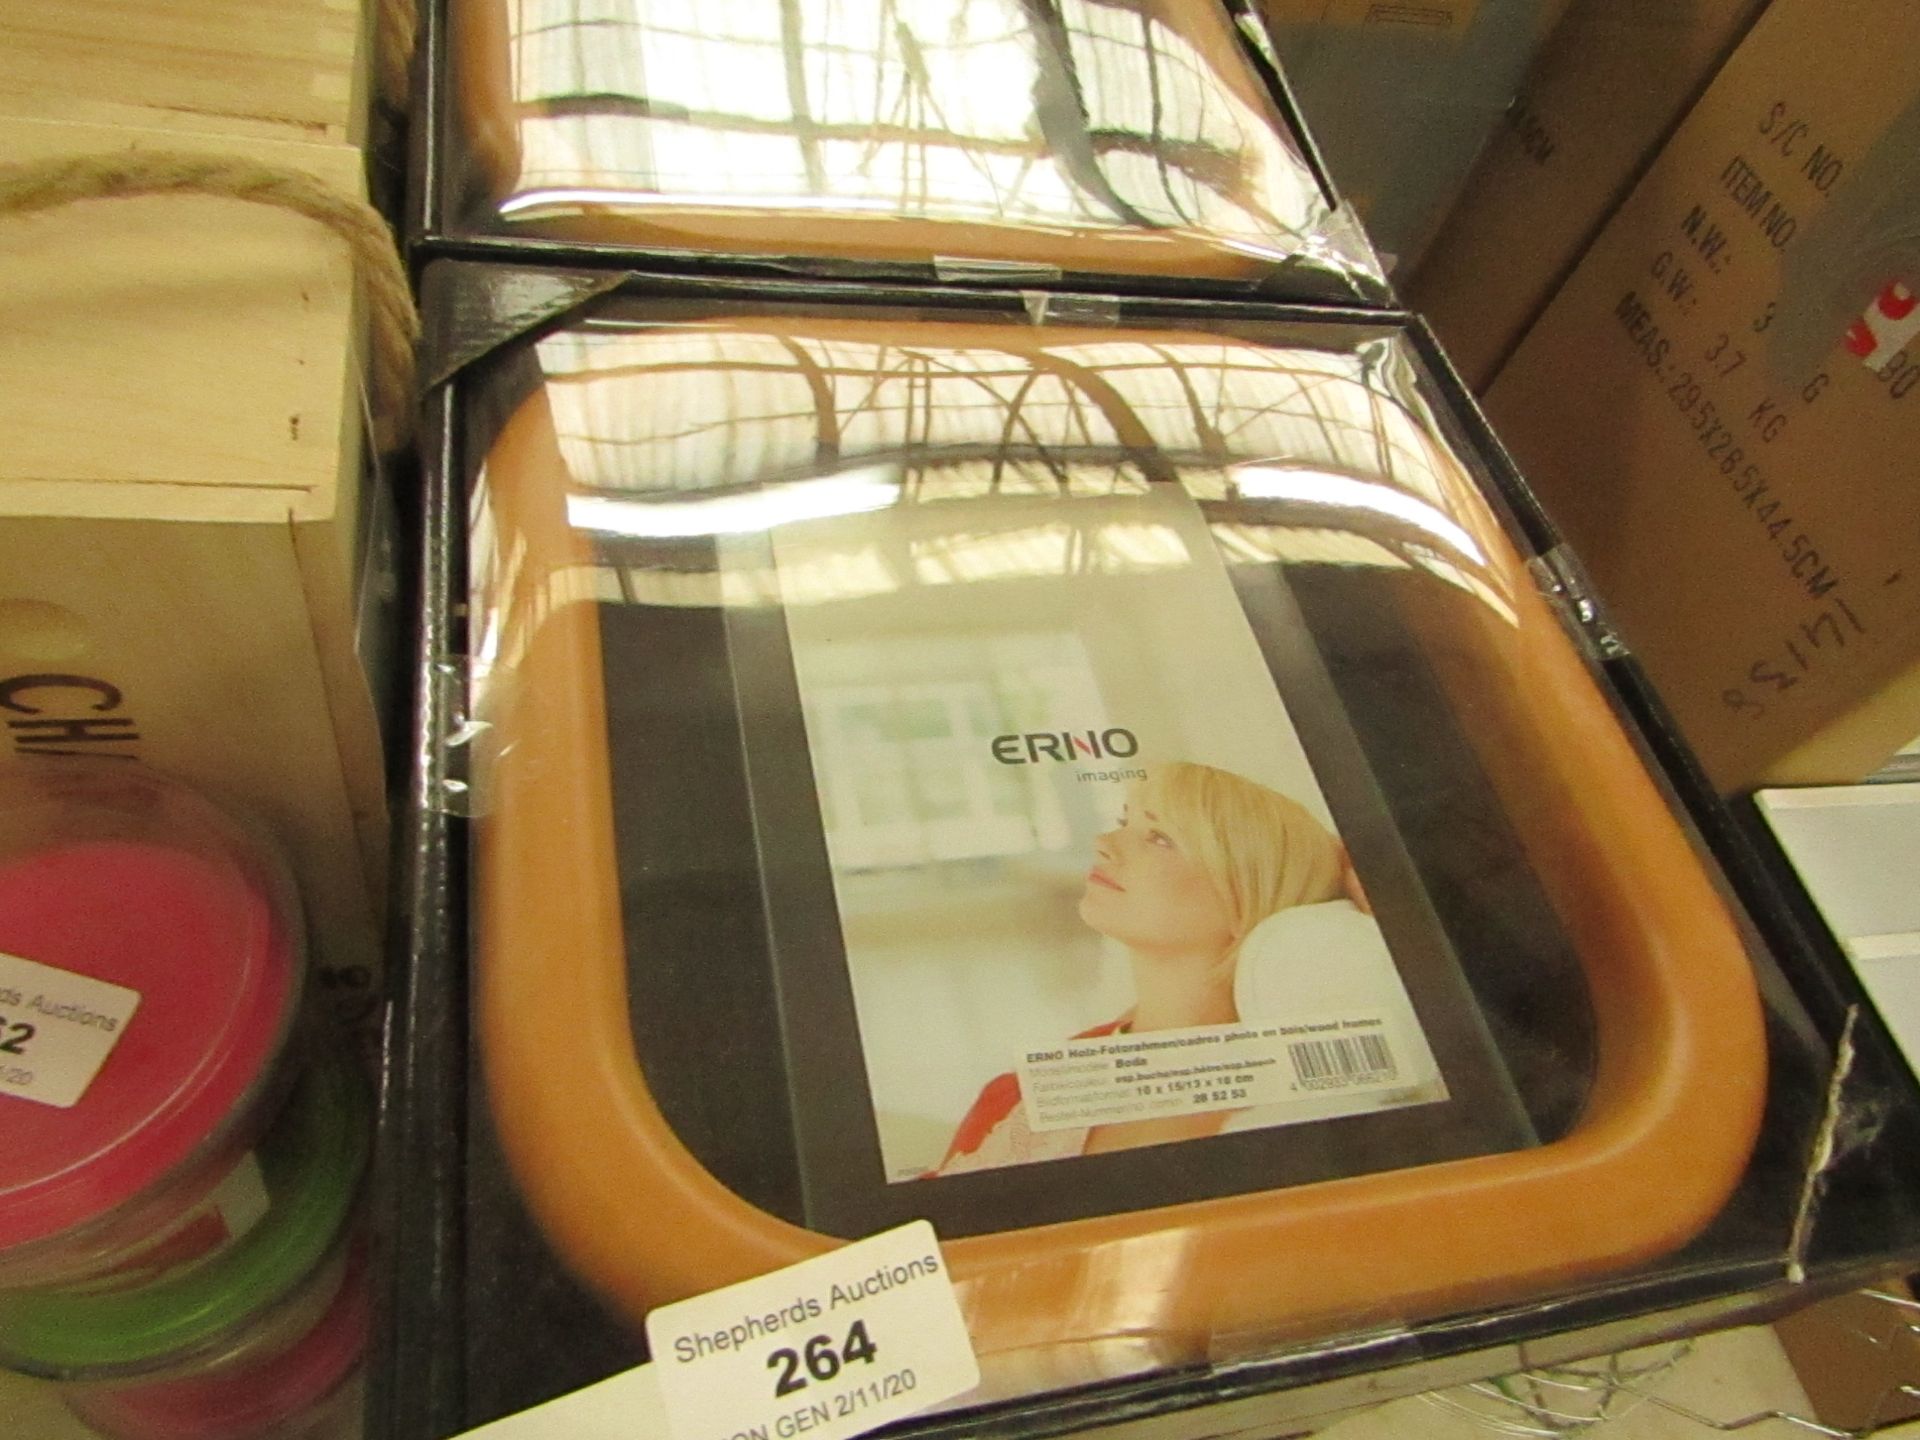 6x Erno Imaging - Wooden Photo Frame 13x18cm - Unused & Packaged.